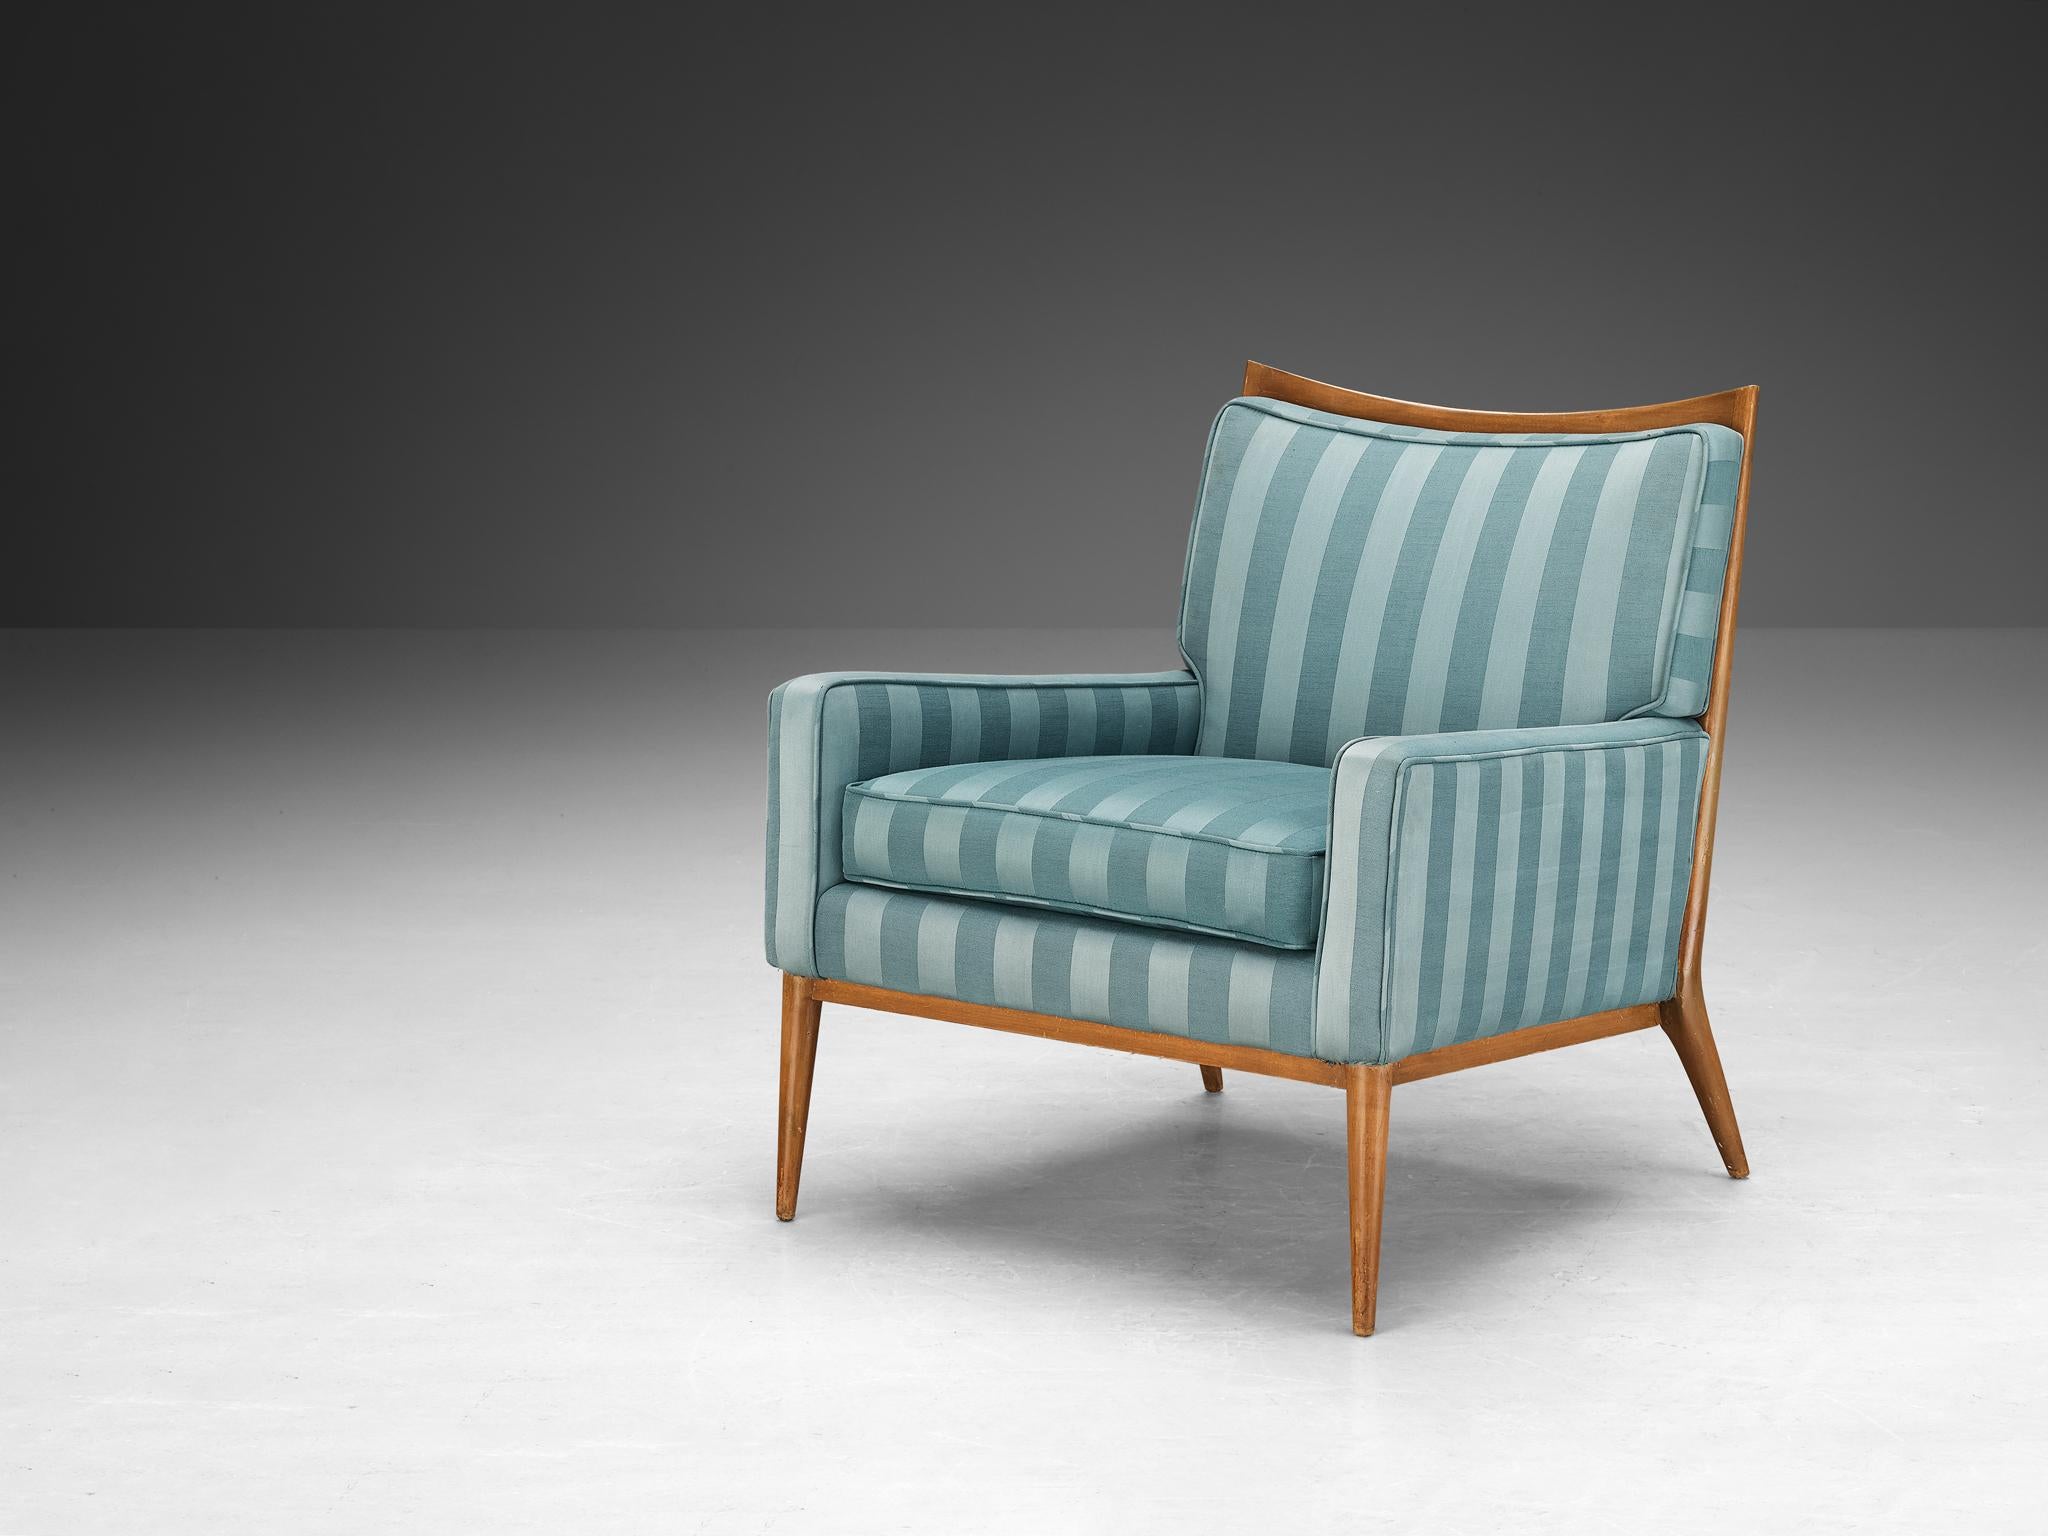 Paul McCobb for Directional Designs, lounge chair, model 1322, walnut, fabric, 1950s. 

A design Paul McCobb model 1322 dating back to the 1950s. The quintessential design features of McCobb's furniture is clearly visible in this armchair such as